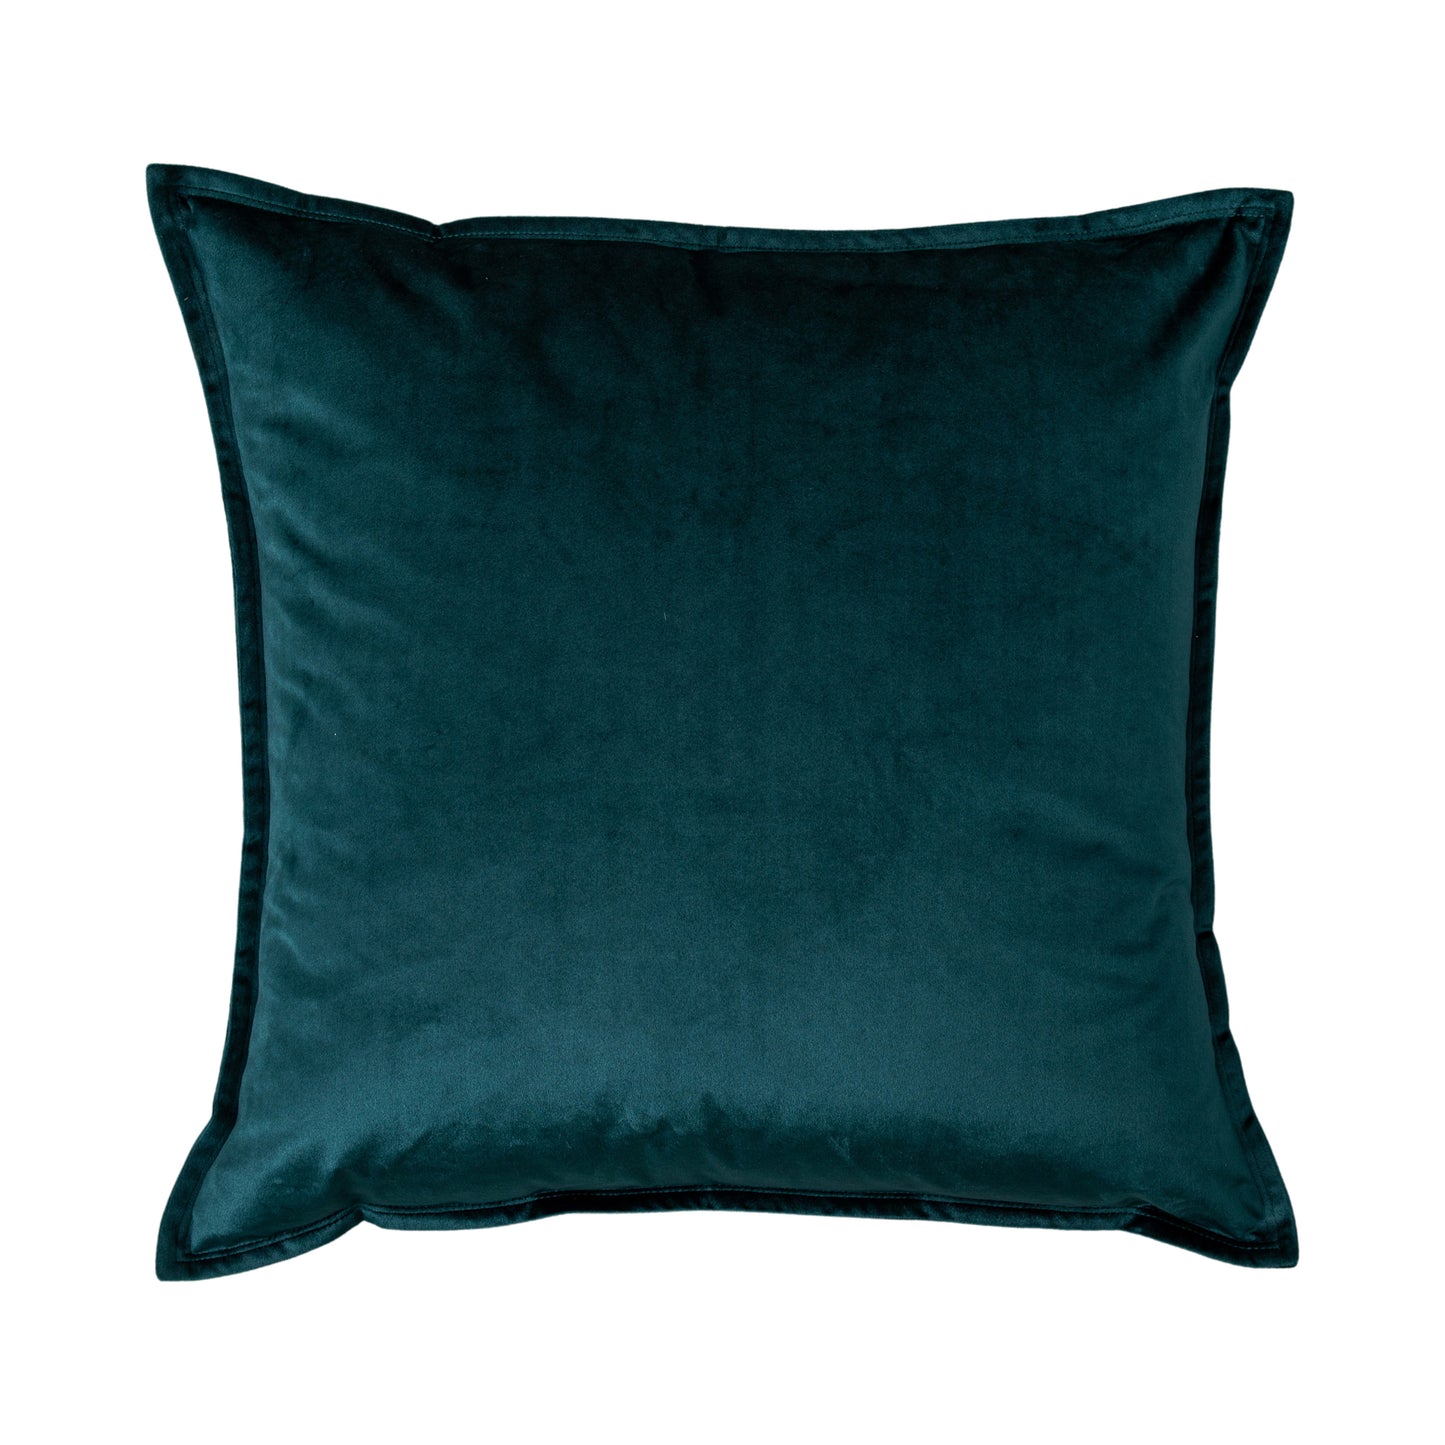 A stylish Meto Velvet Oxford Cushion in Emerald 580x580mm for interior decor available at Kikiathome.co.uk